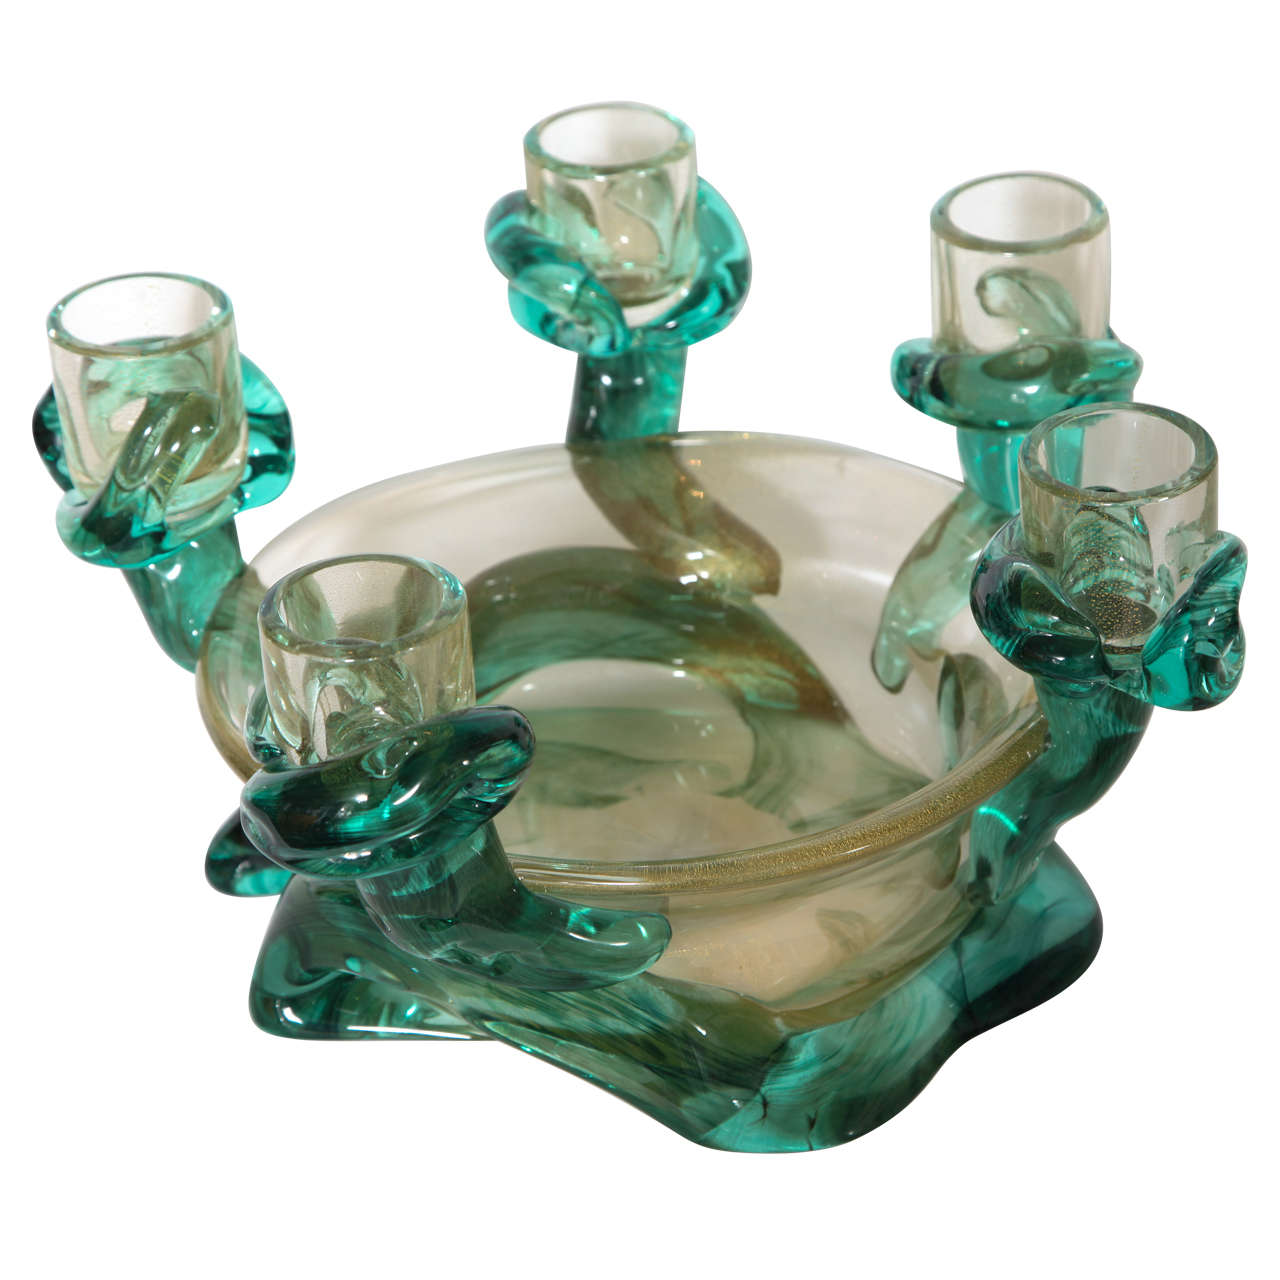 Seguso Gold Fleck Free-Form Glass Centrepiece Bowl with Candleholders